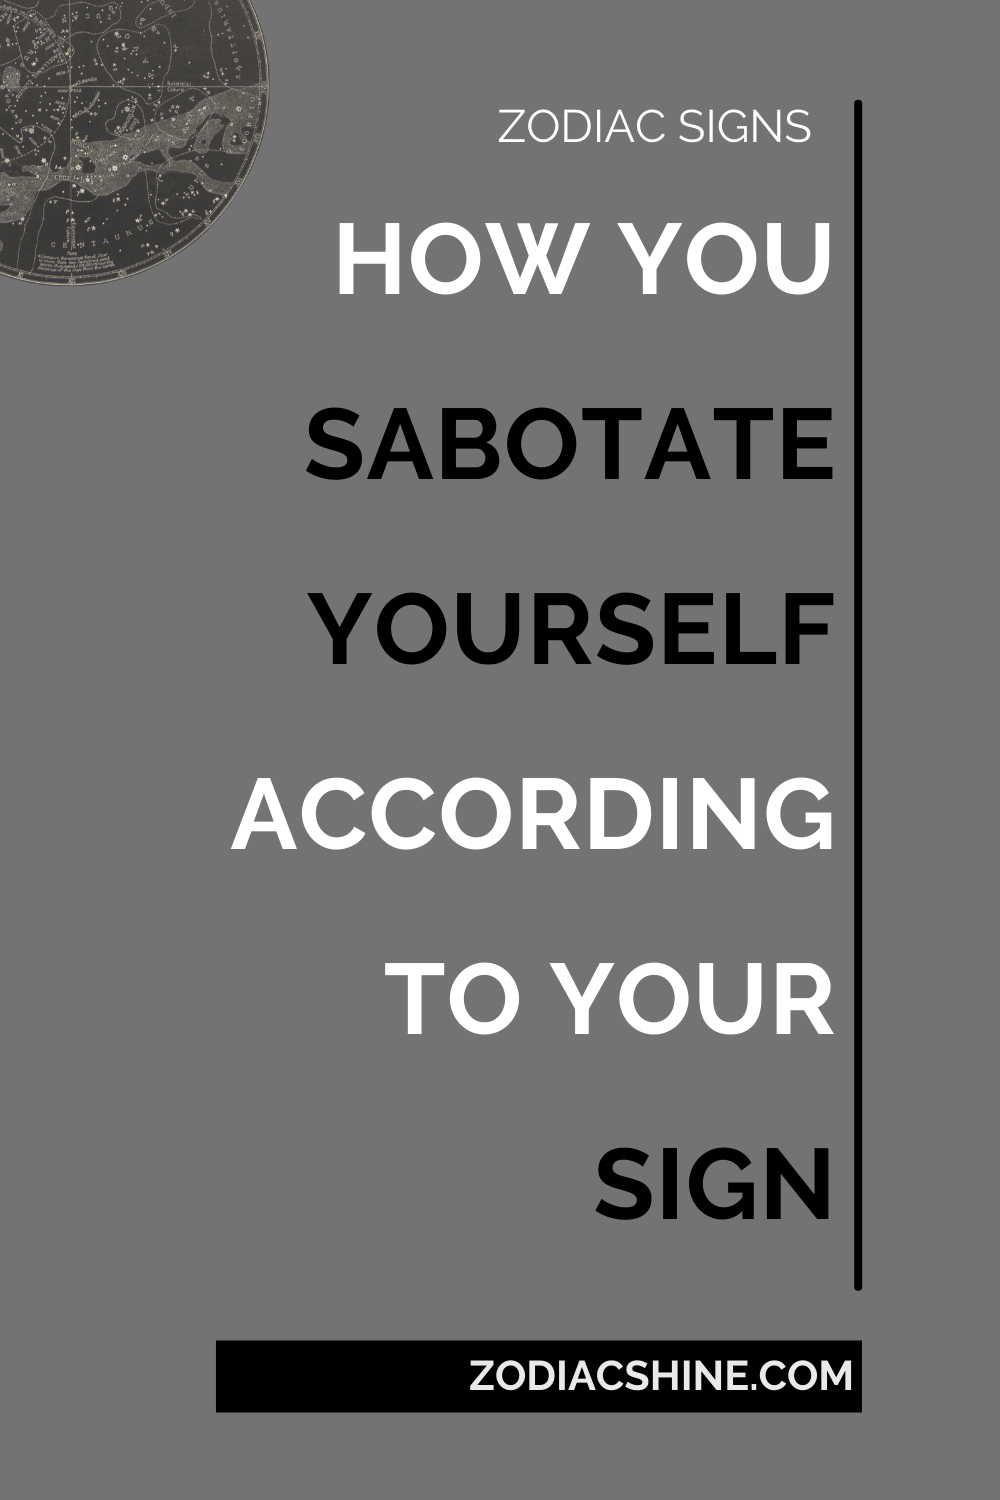 HOW YOU SABOTATE YOURSELF ACCORDING TO YOUR SIGN